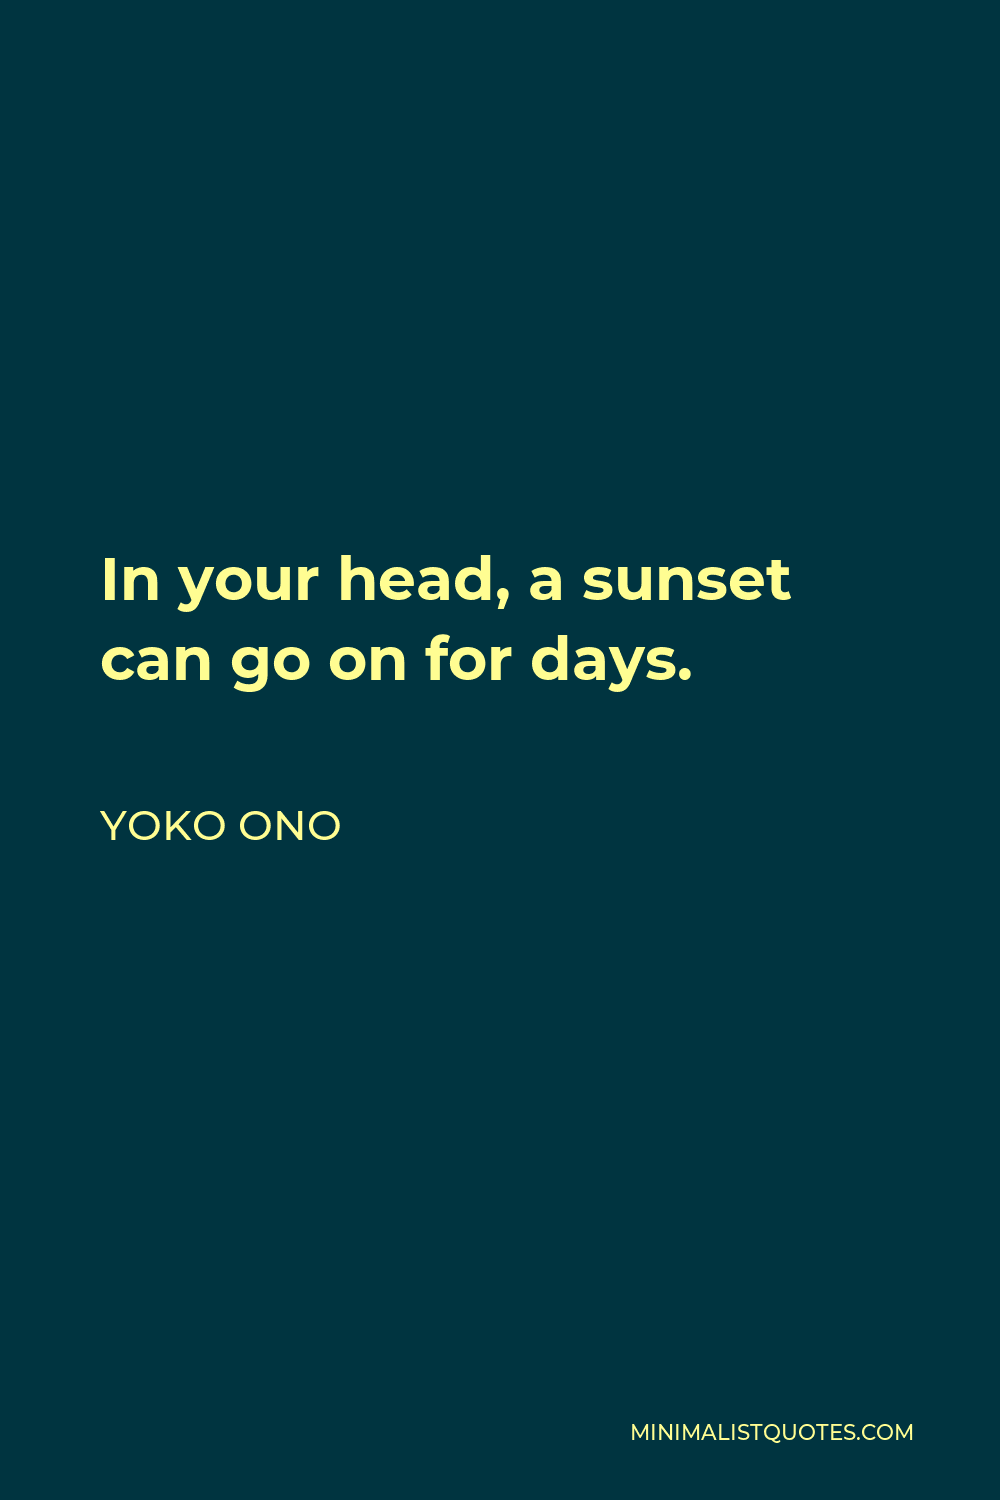 Yoko Ono Quote - In your head, a sunset can go on for days.